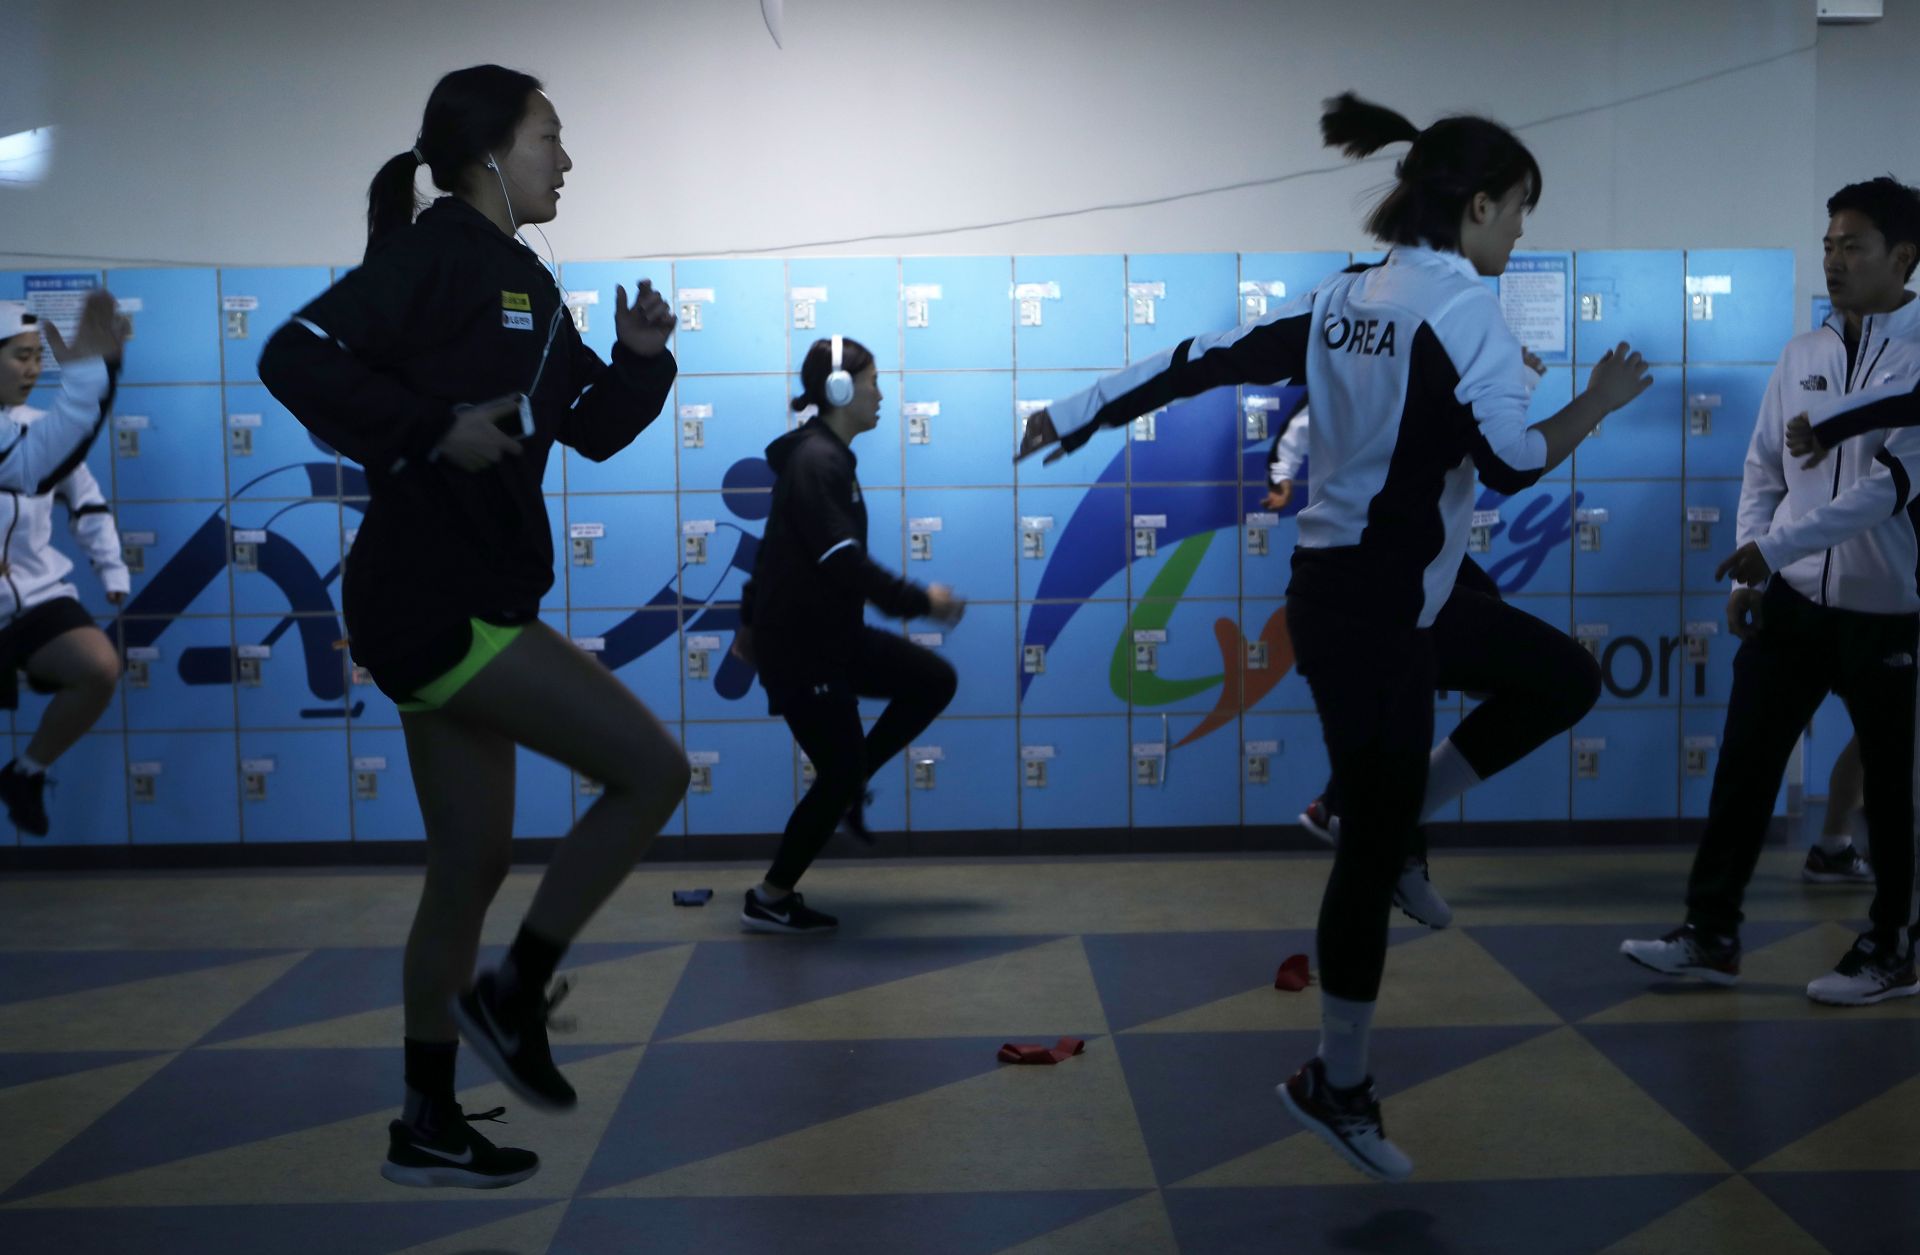 Members of the Korean women's ice hockey team warms up before a match days before the 2018 Winter Olympics, where they will compete as a unified team for the first time in Olympic history. 